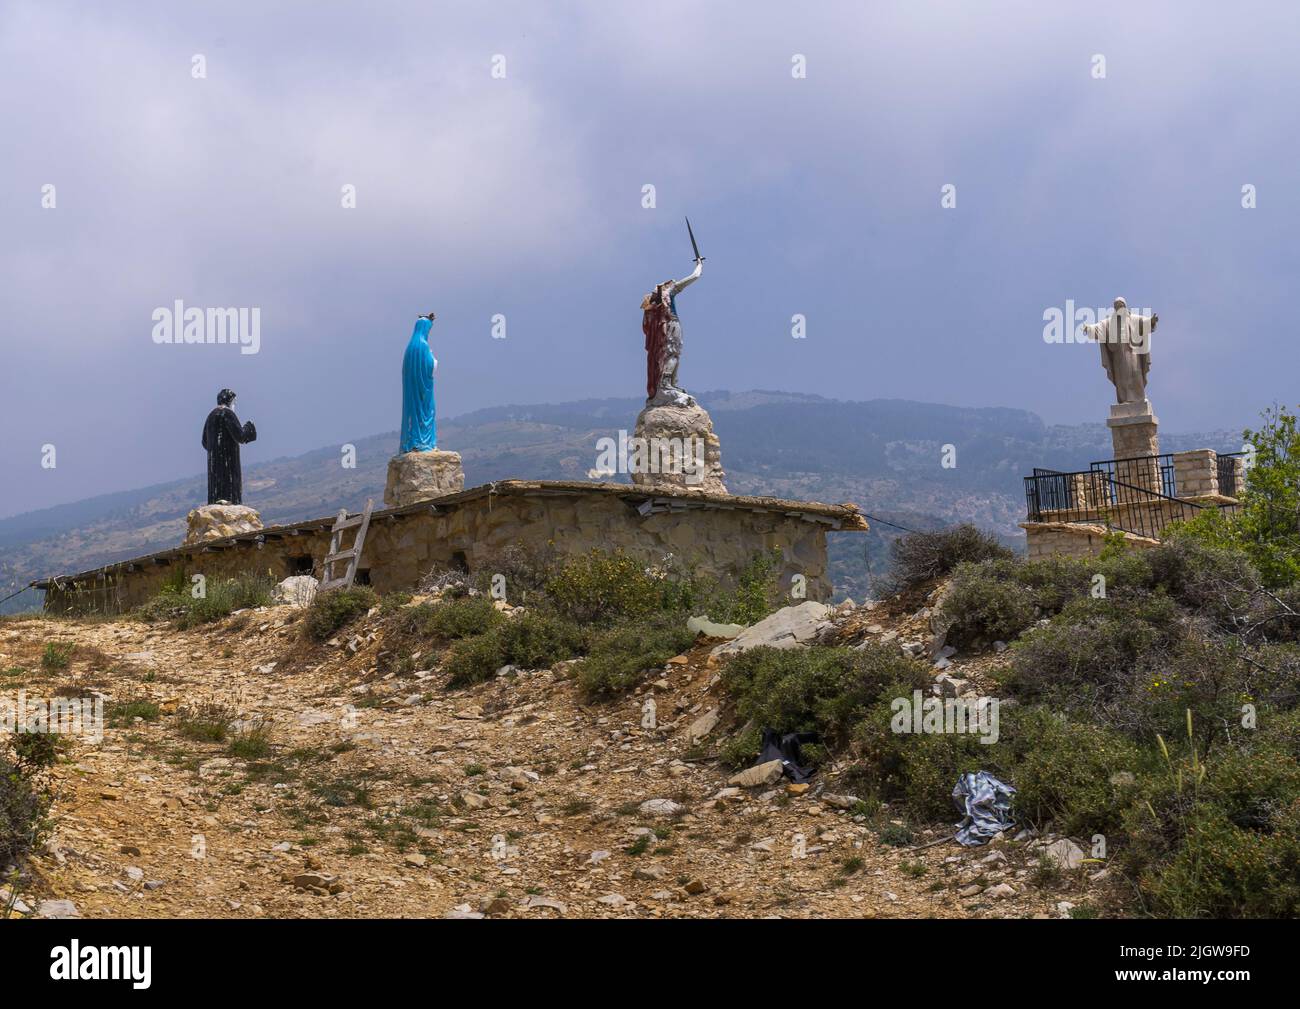 Christian statues at the top of the mountain, North Lebanon Governorate, Hardine, Lebanon Stock Photo